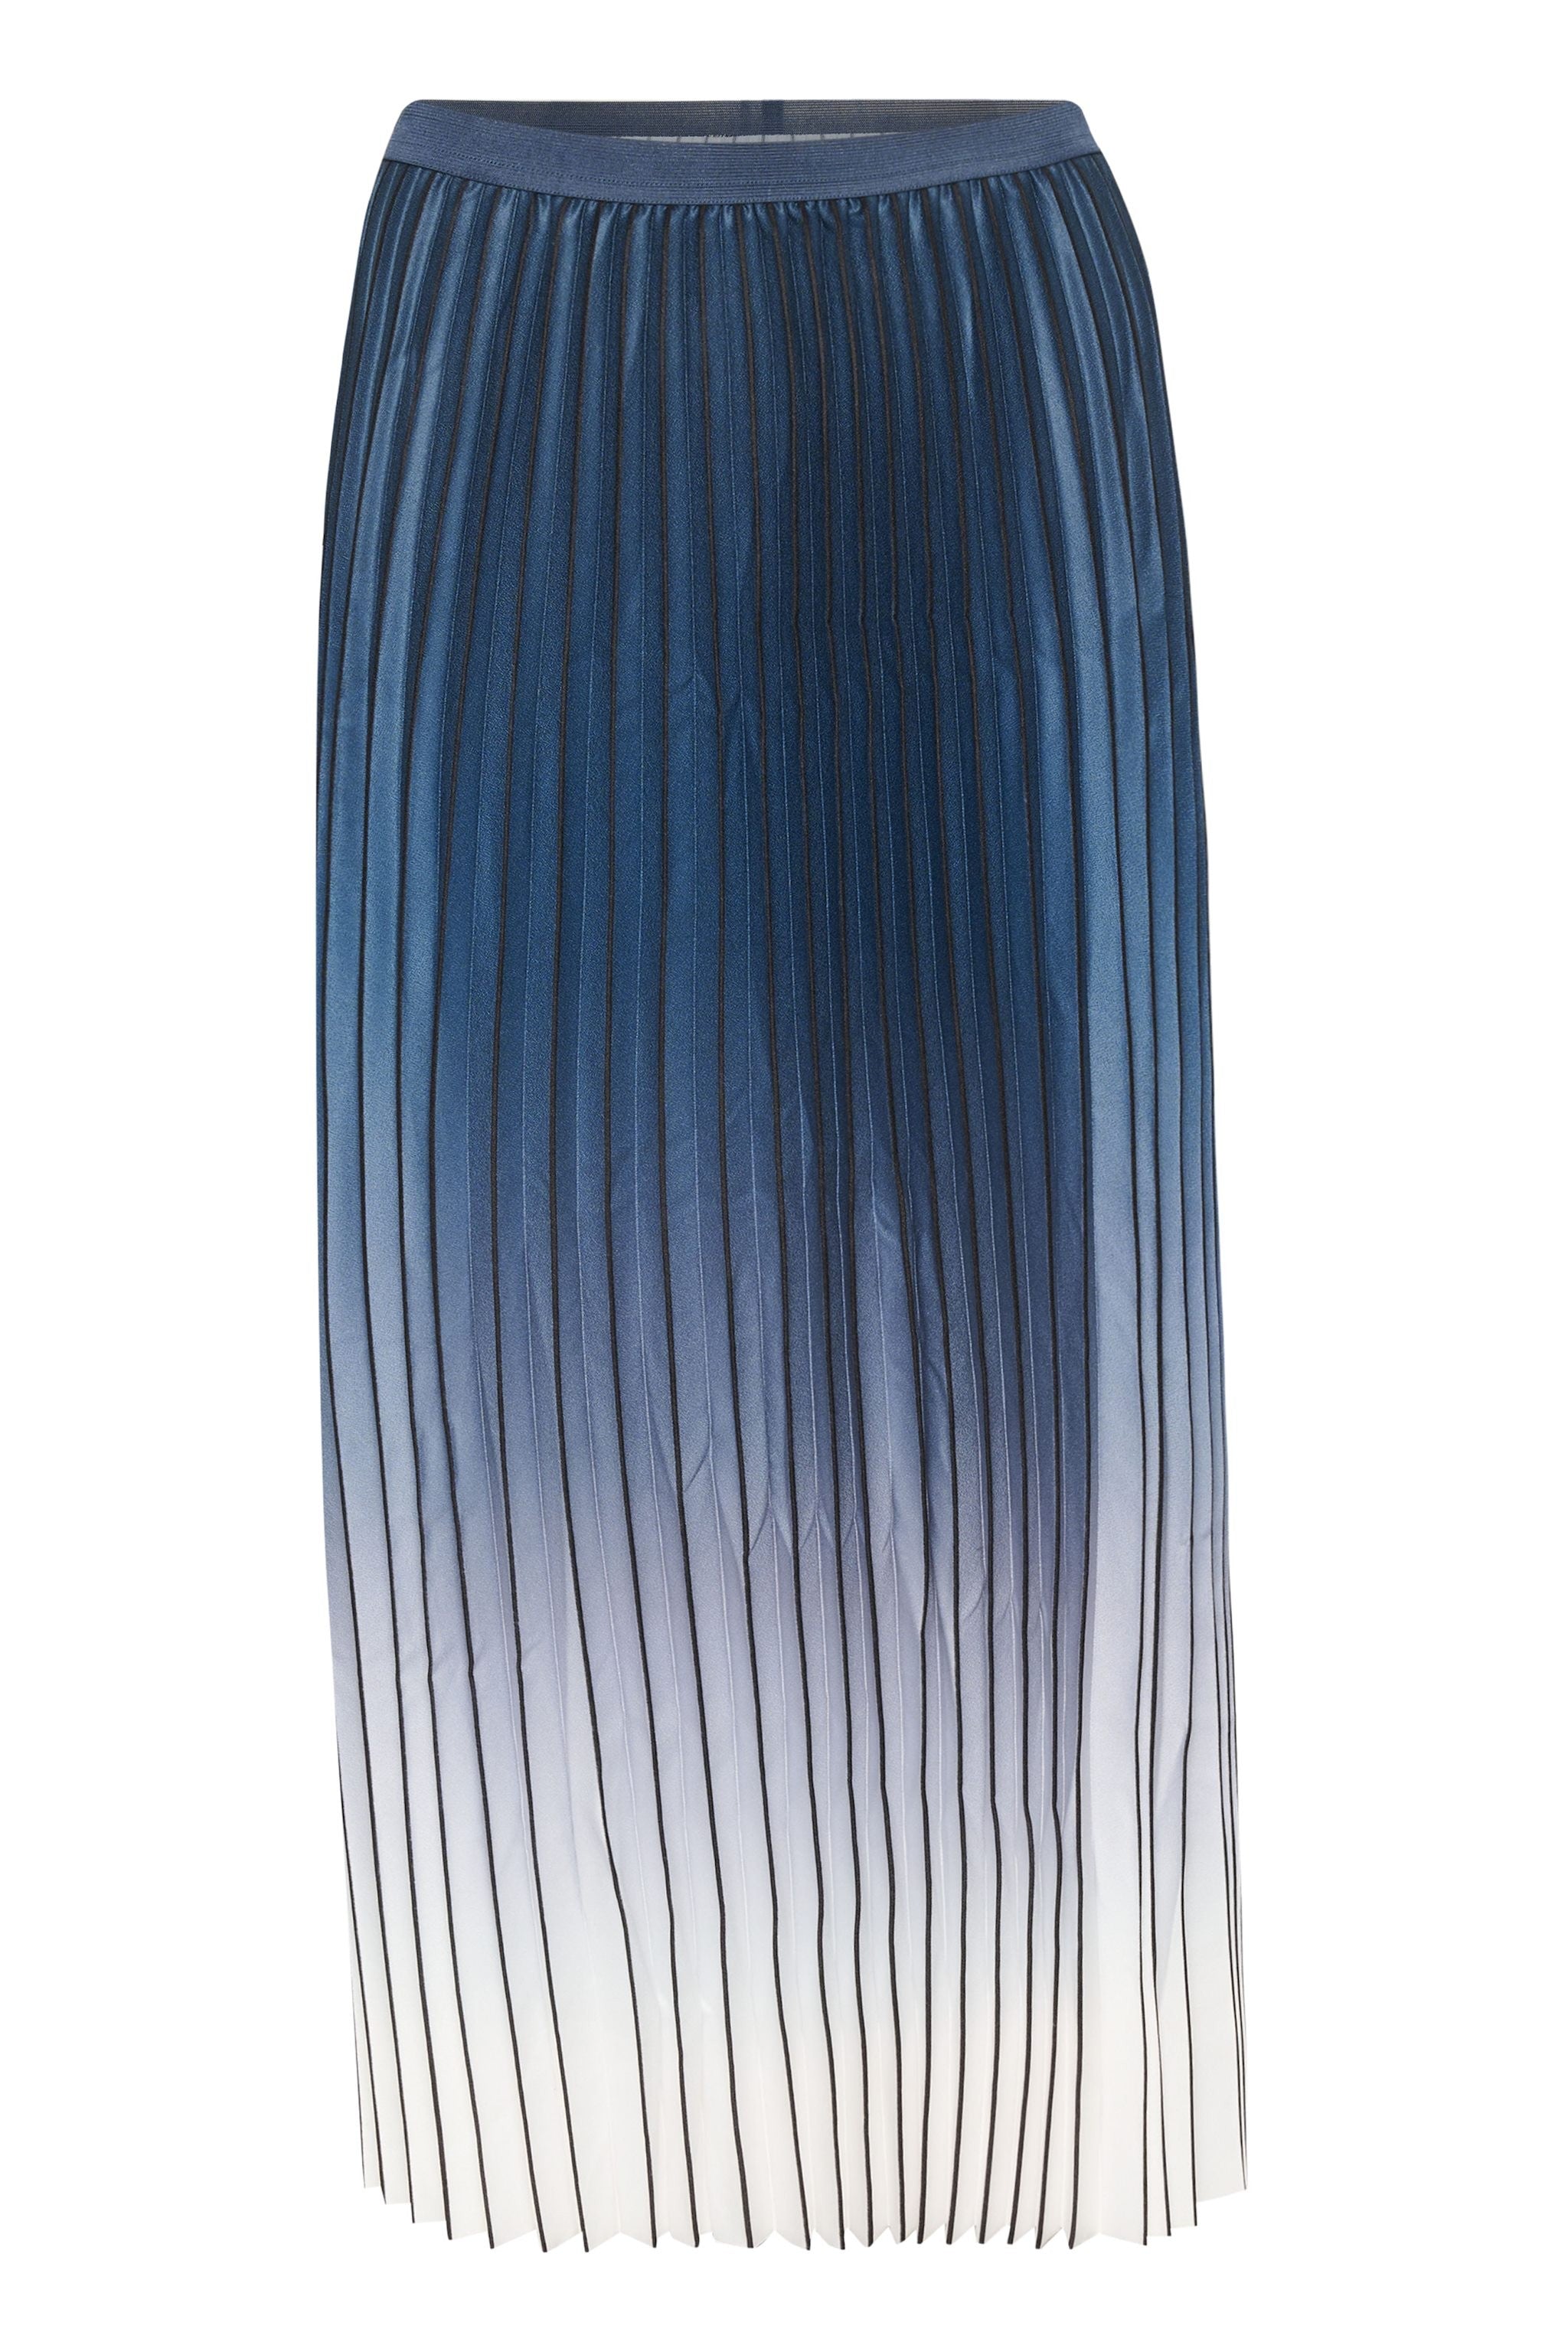 Culture Pleated Ombre Skirt Navy